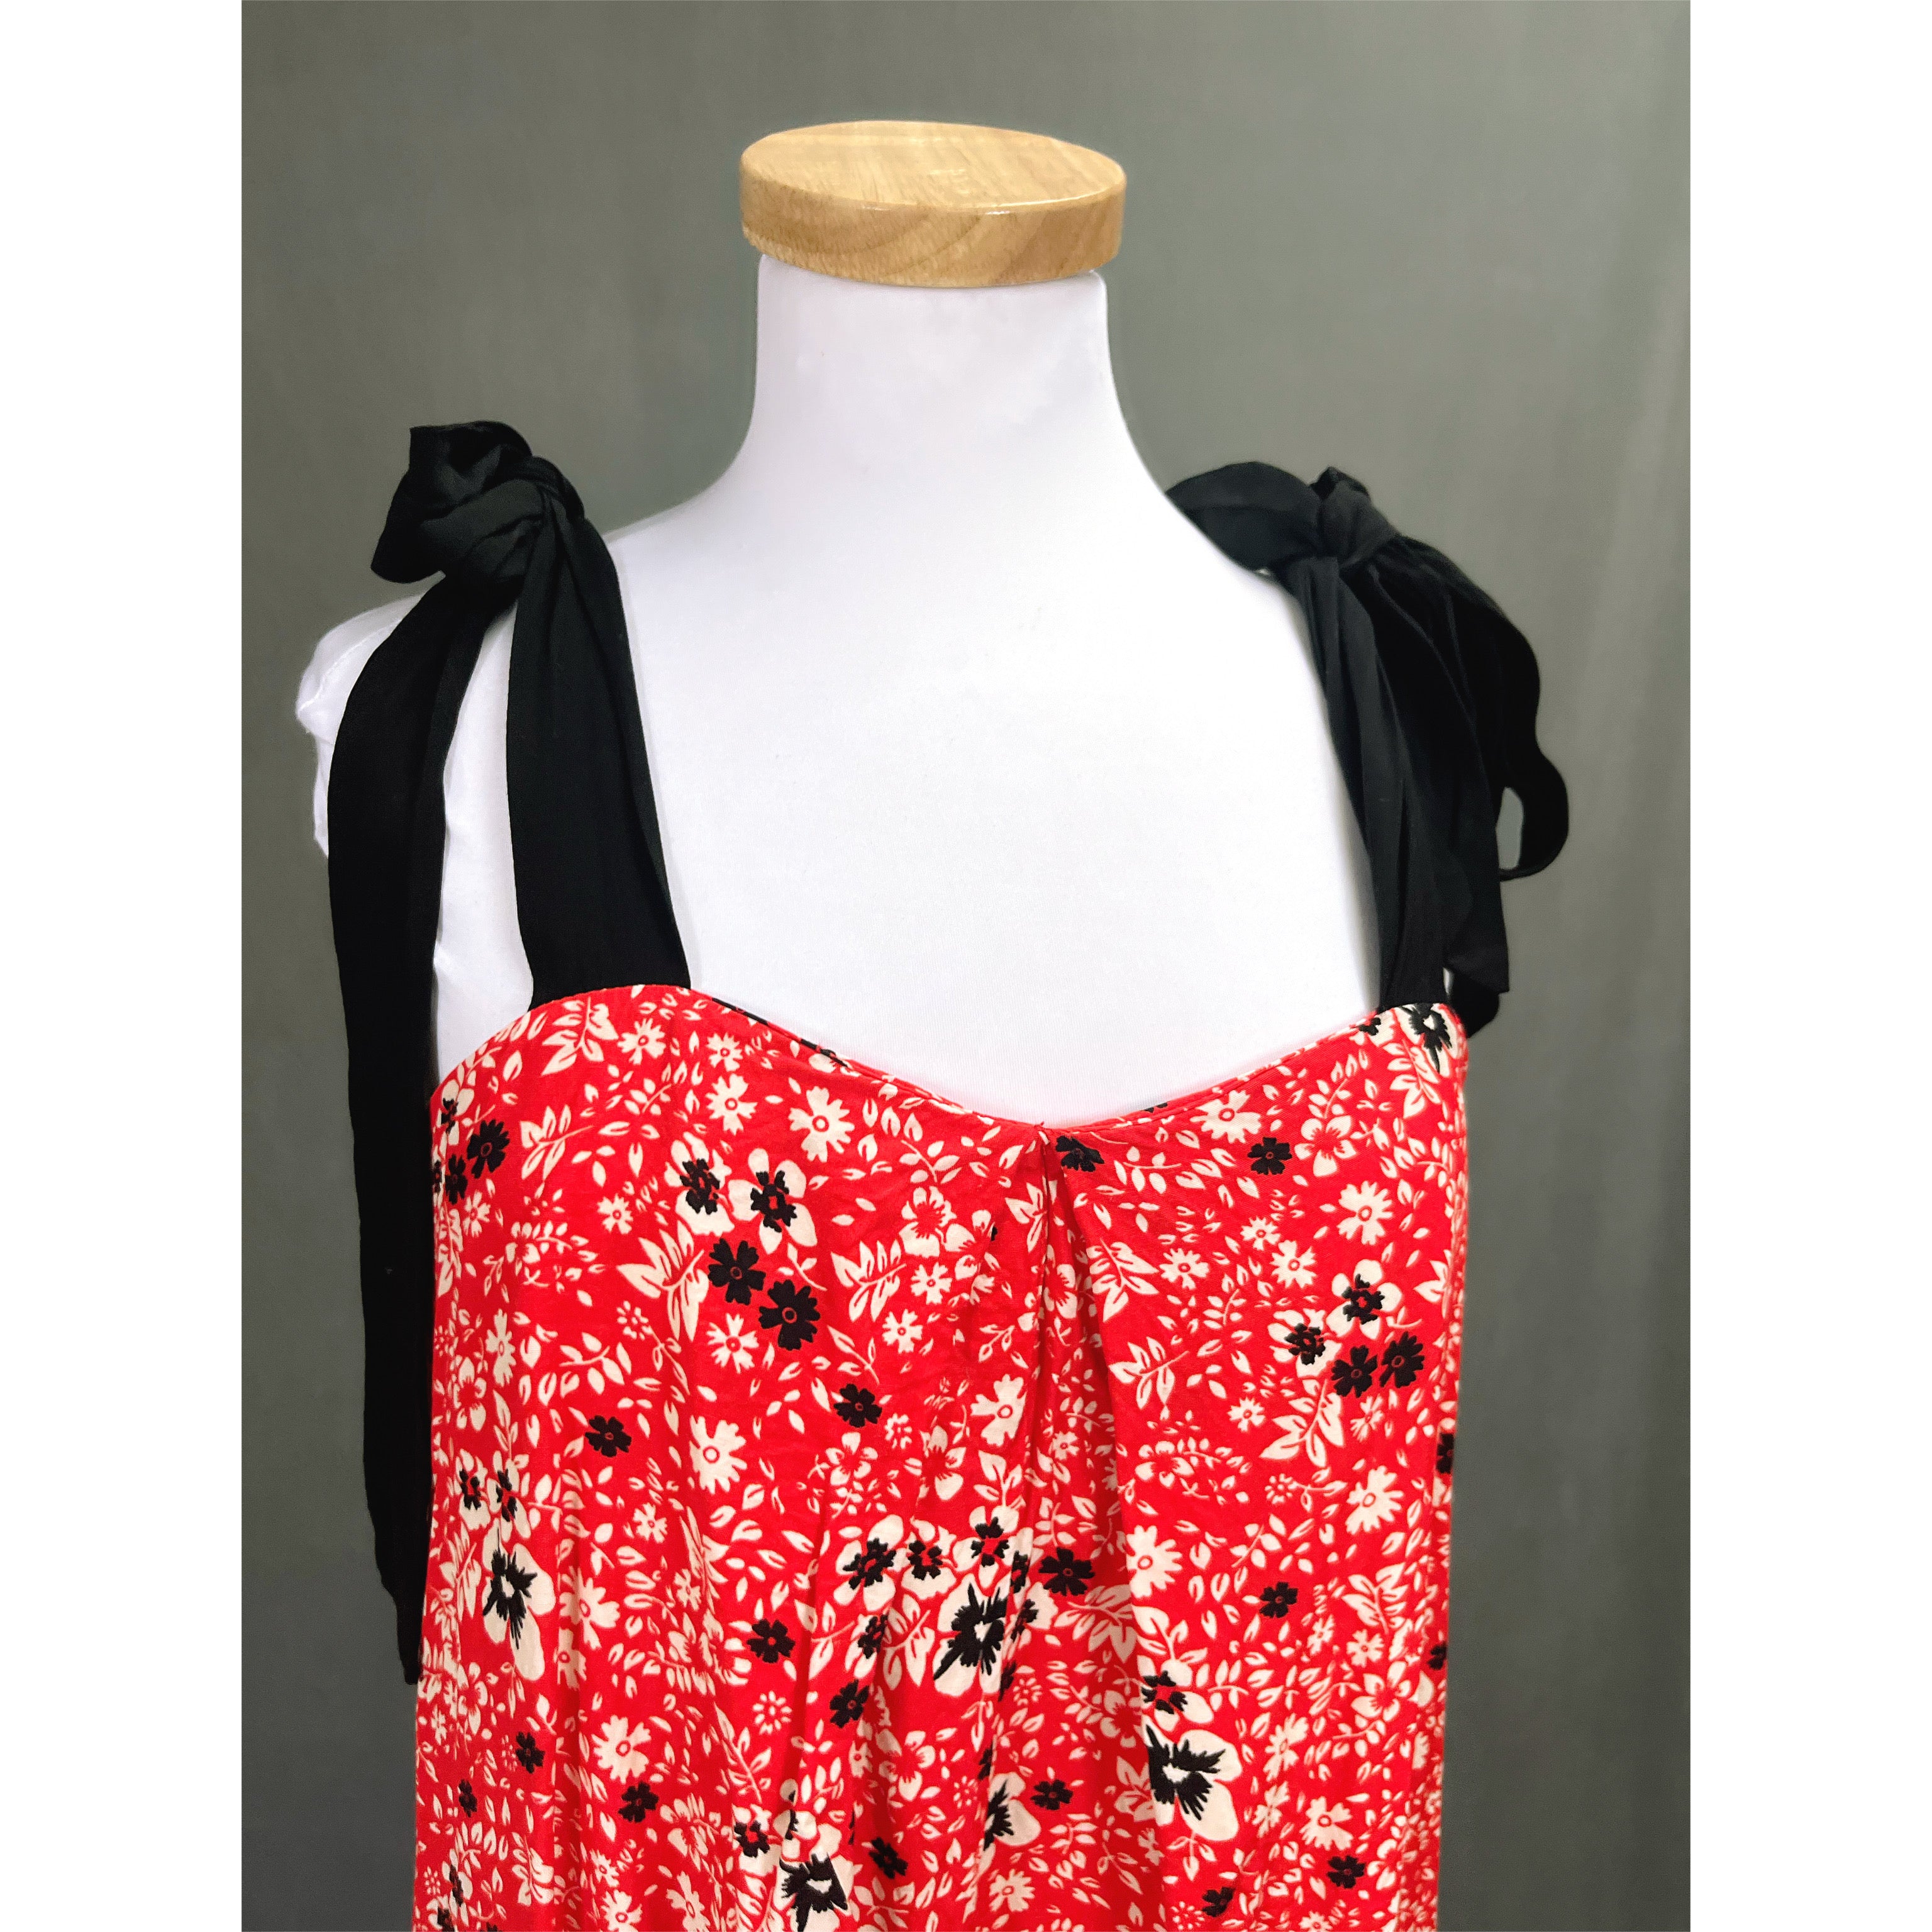 Free People red floral jumpsuit, size XS